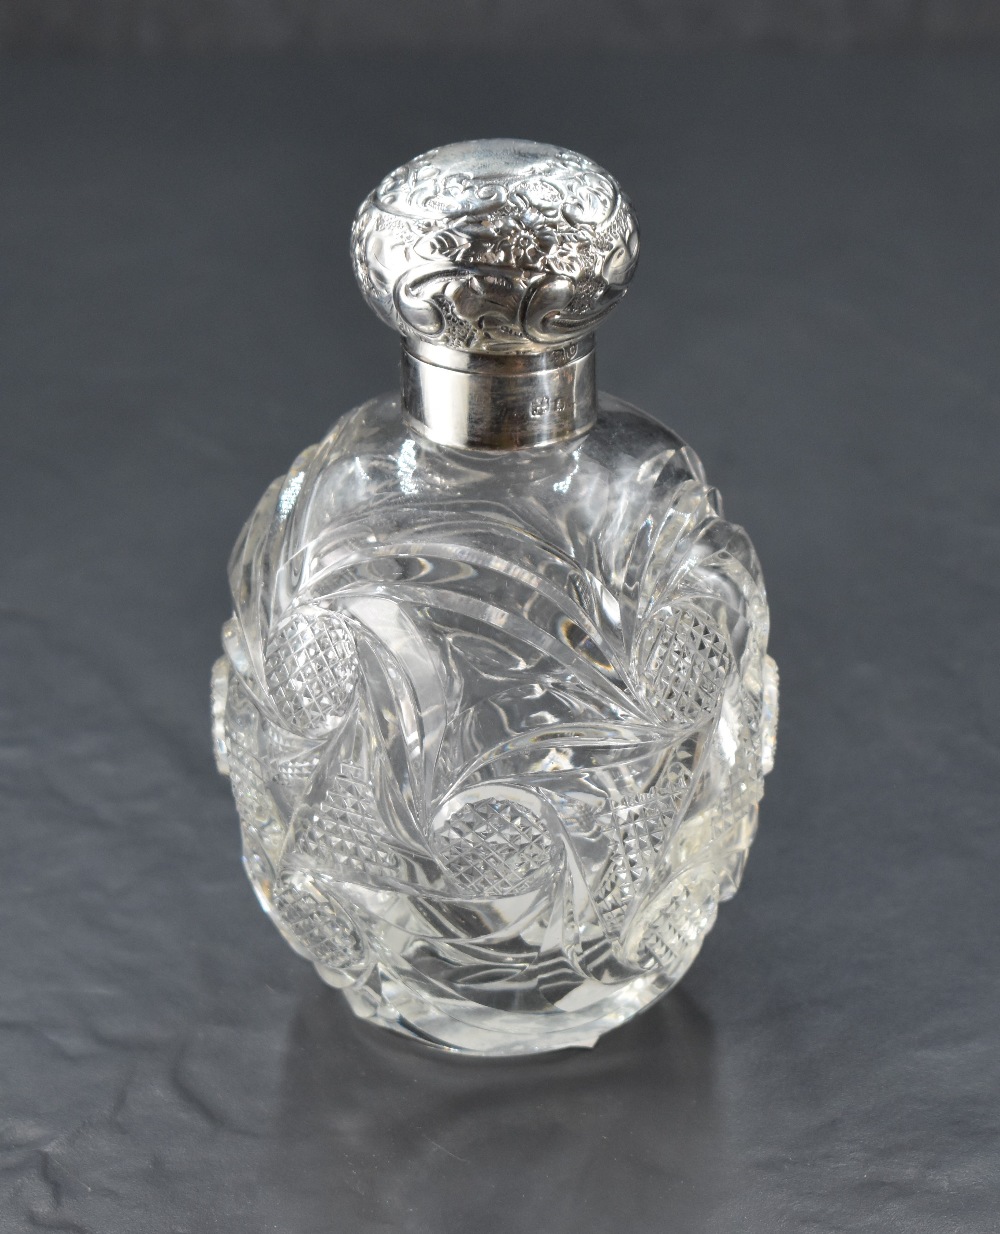 A large silver-mounted cut-glass scent bottle, having a foliate embossed and hinged cover over the